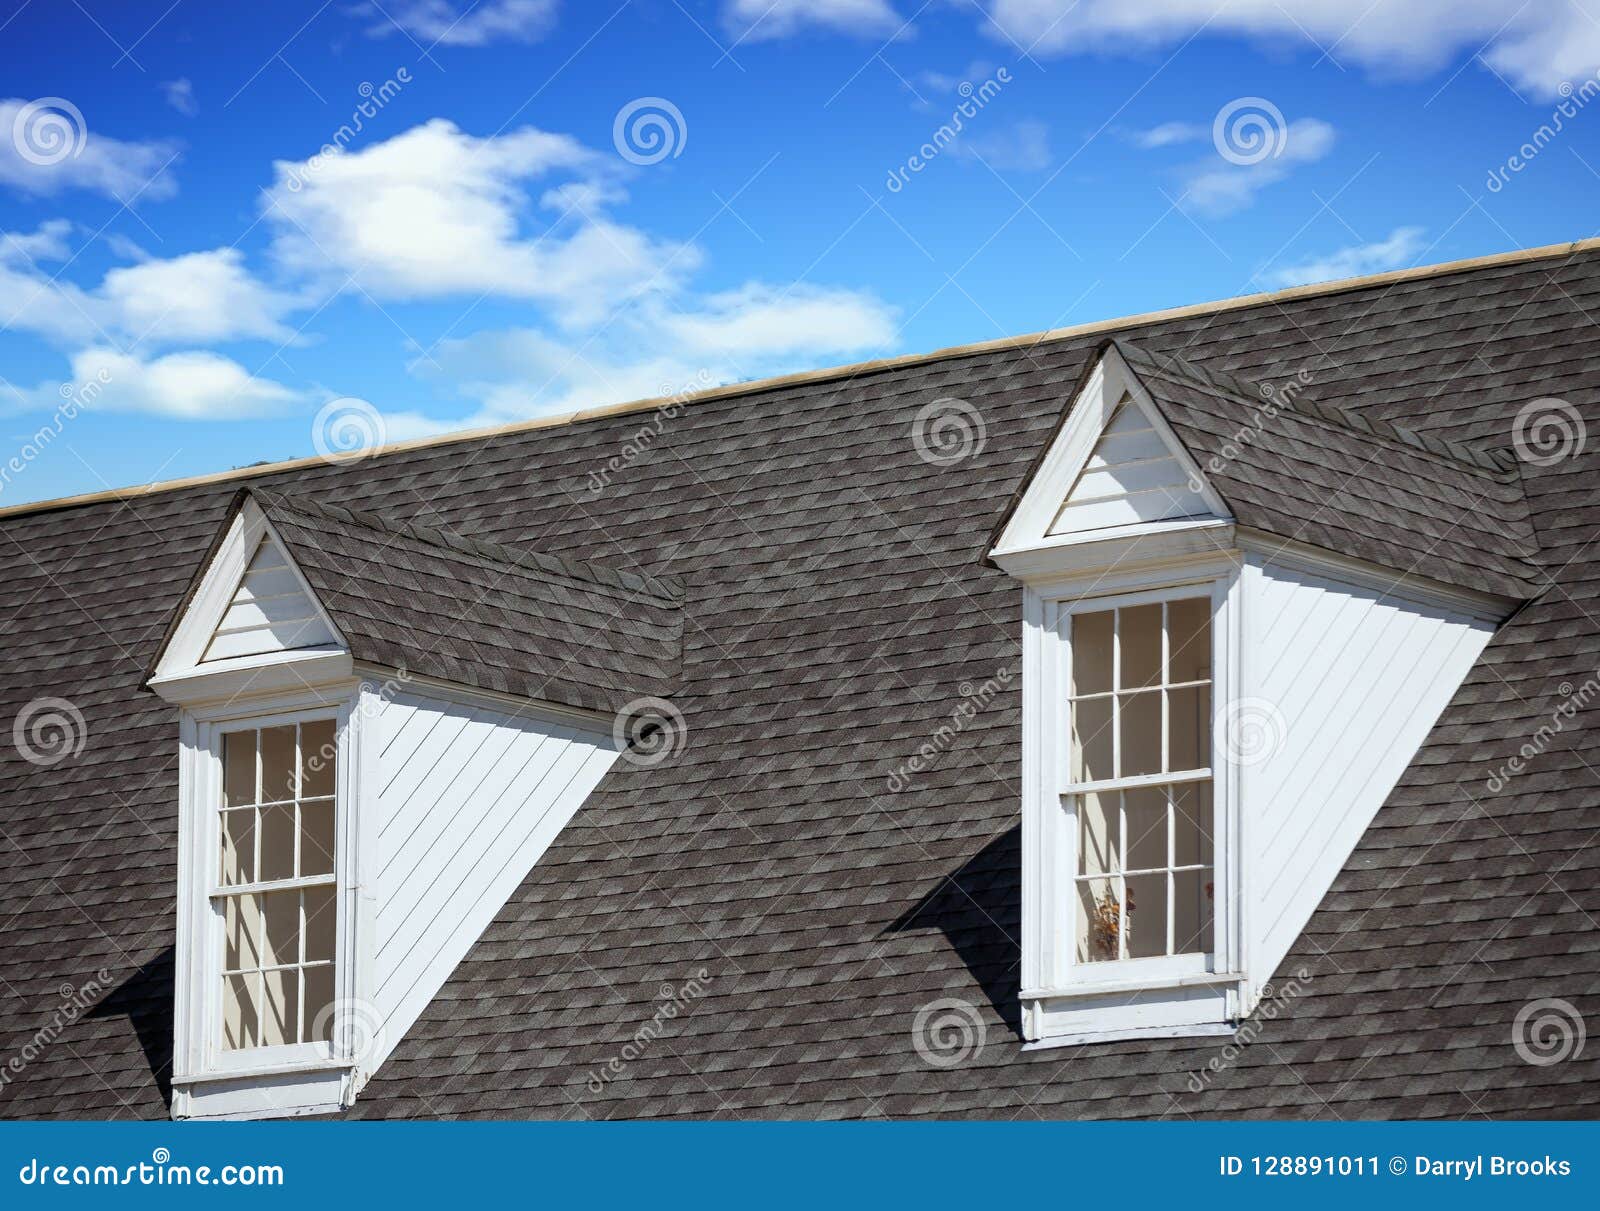 two white dormers on grey shingle roof